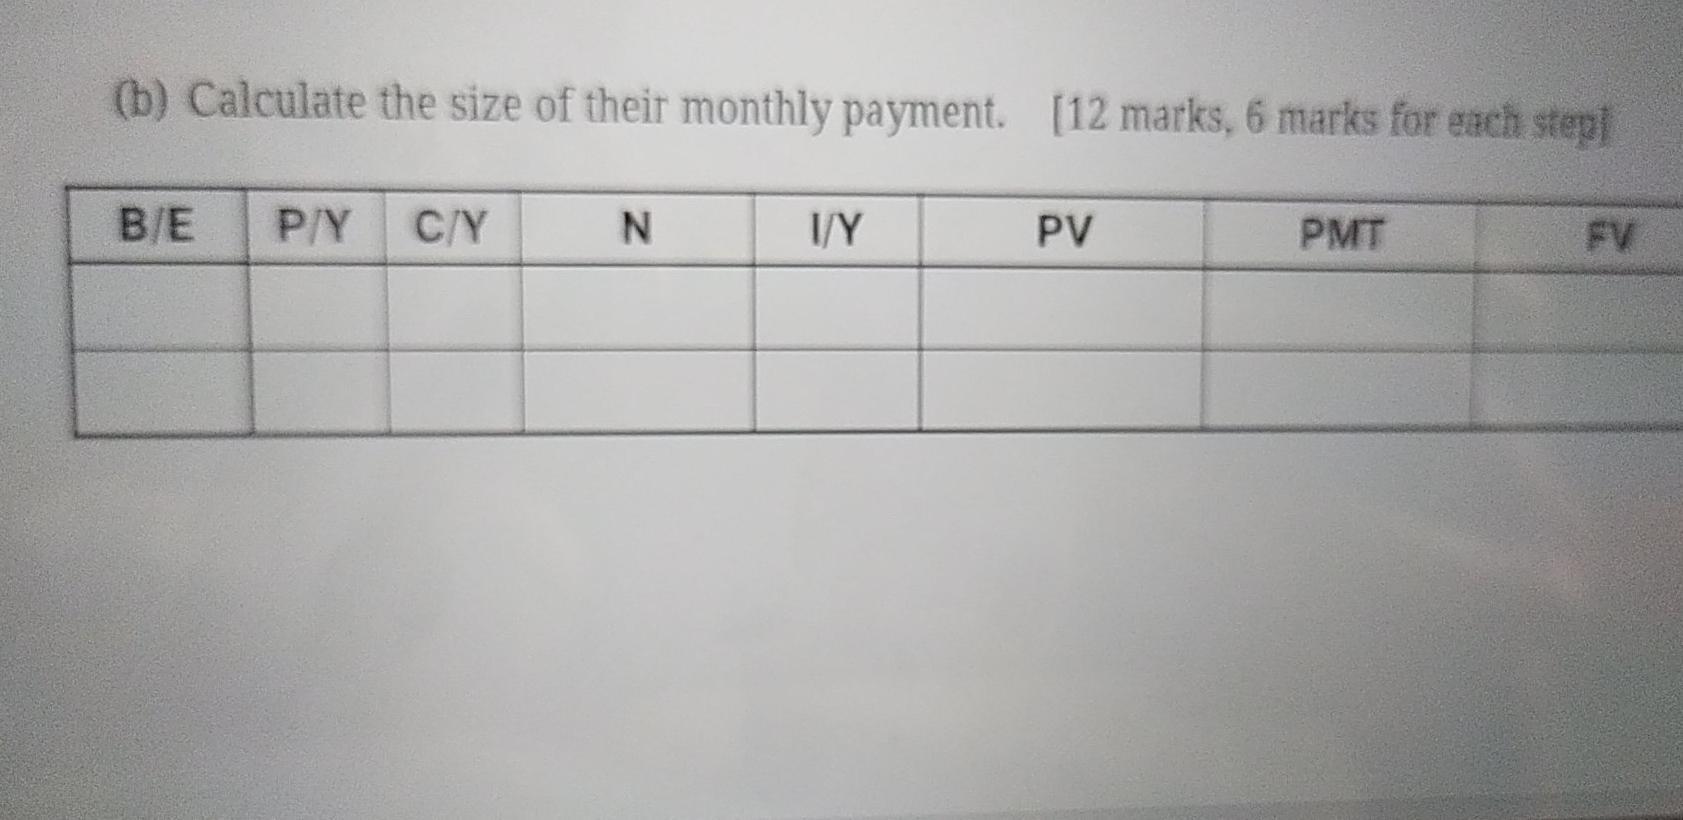 (b) Calculate the size of their monthly payment. [12 marks, 6 marks for each step B/E P/Y C/Y NI/Y PV PMT